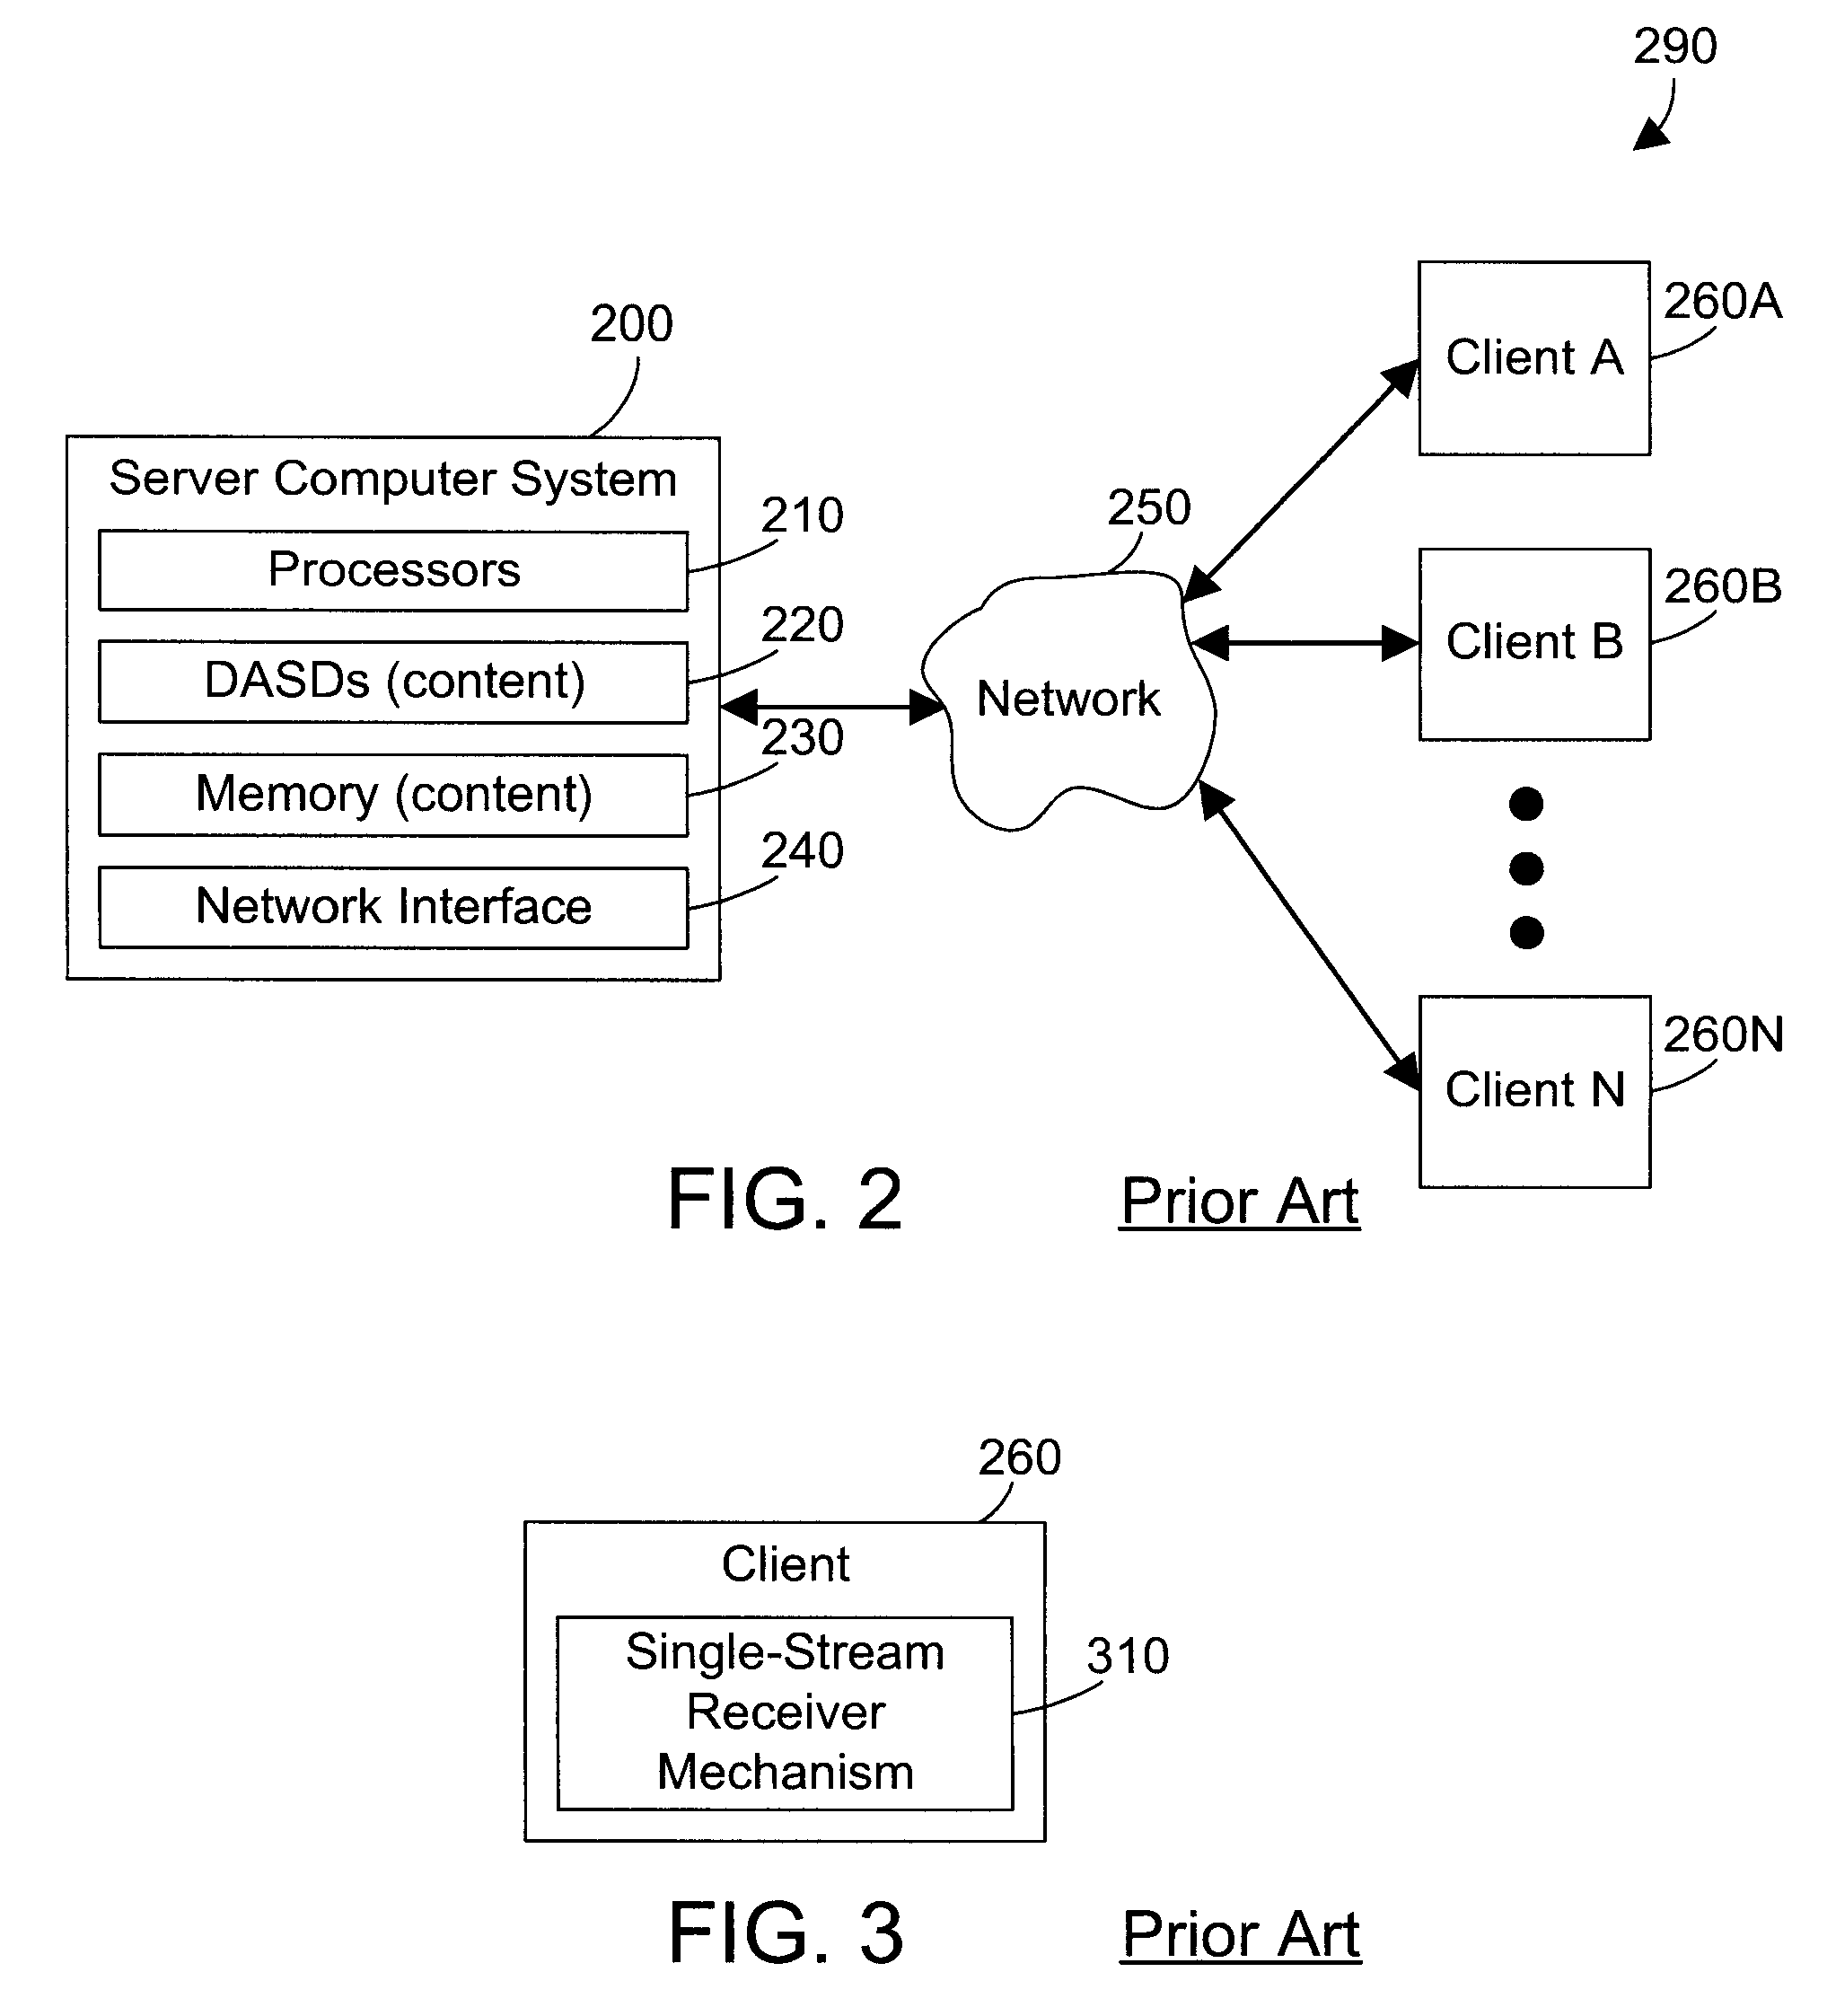 Apparatus and Method for Serving Digital Content Across Multiple Network Elements